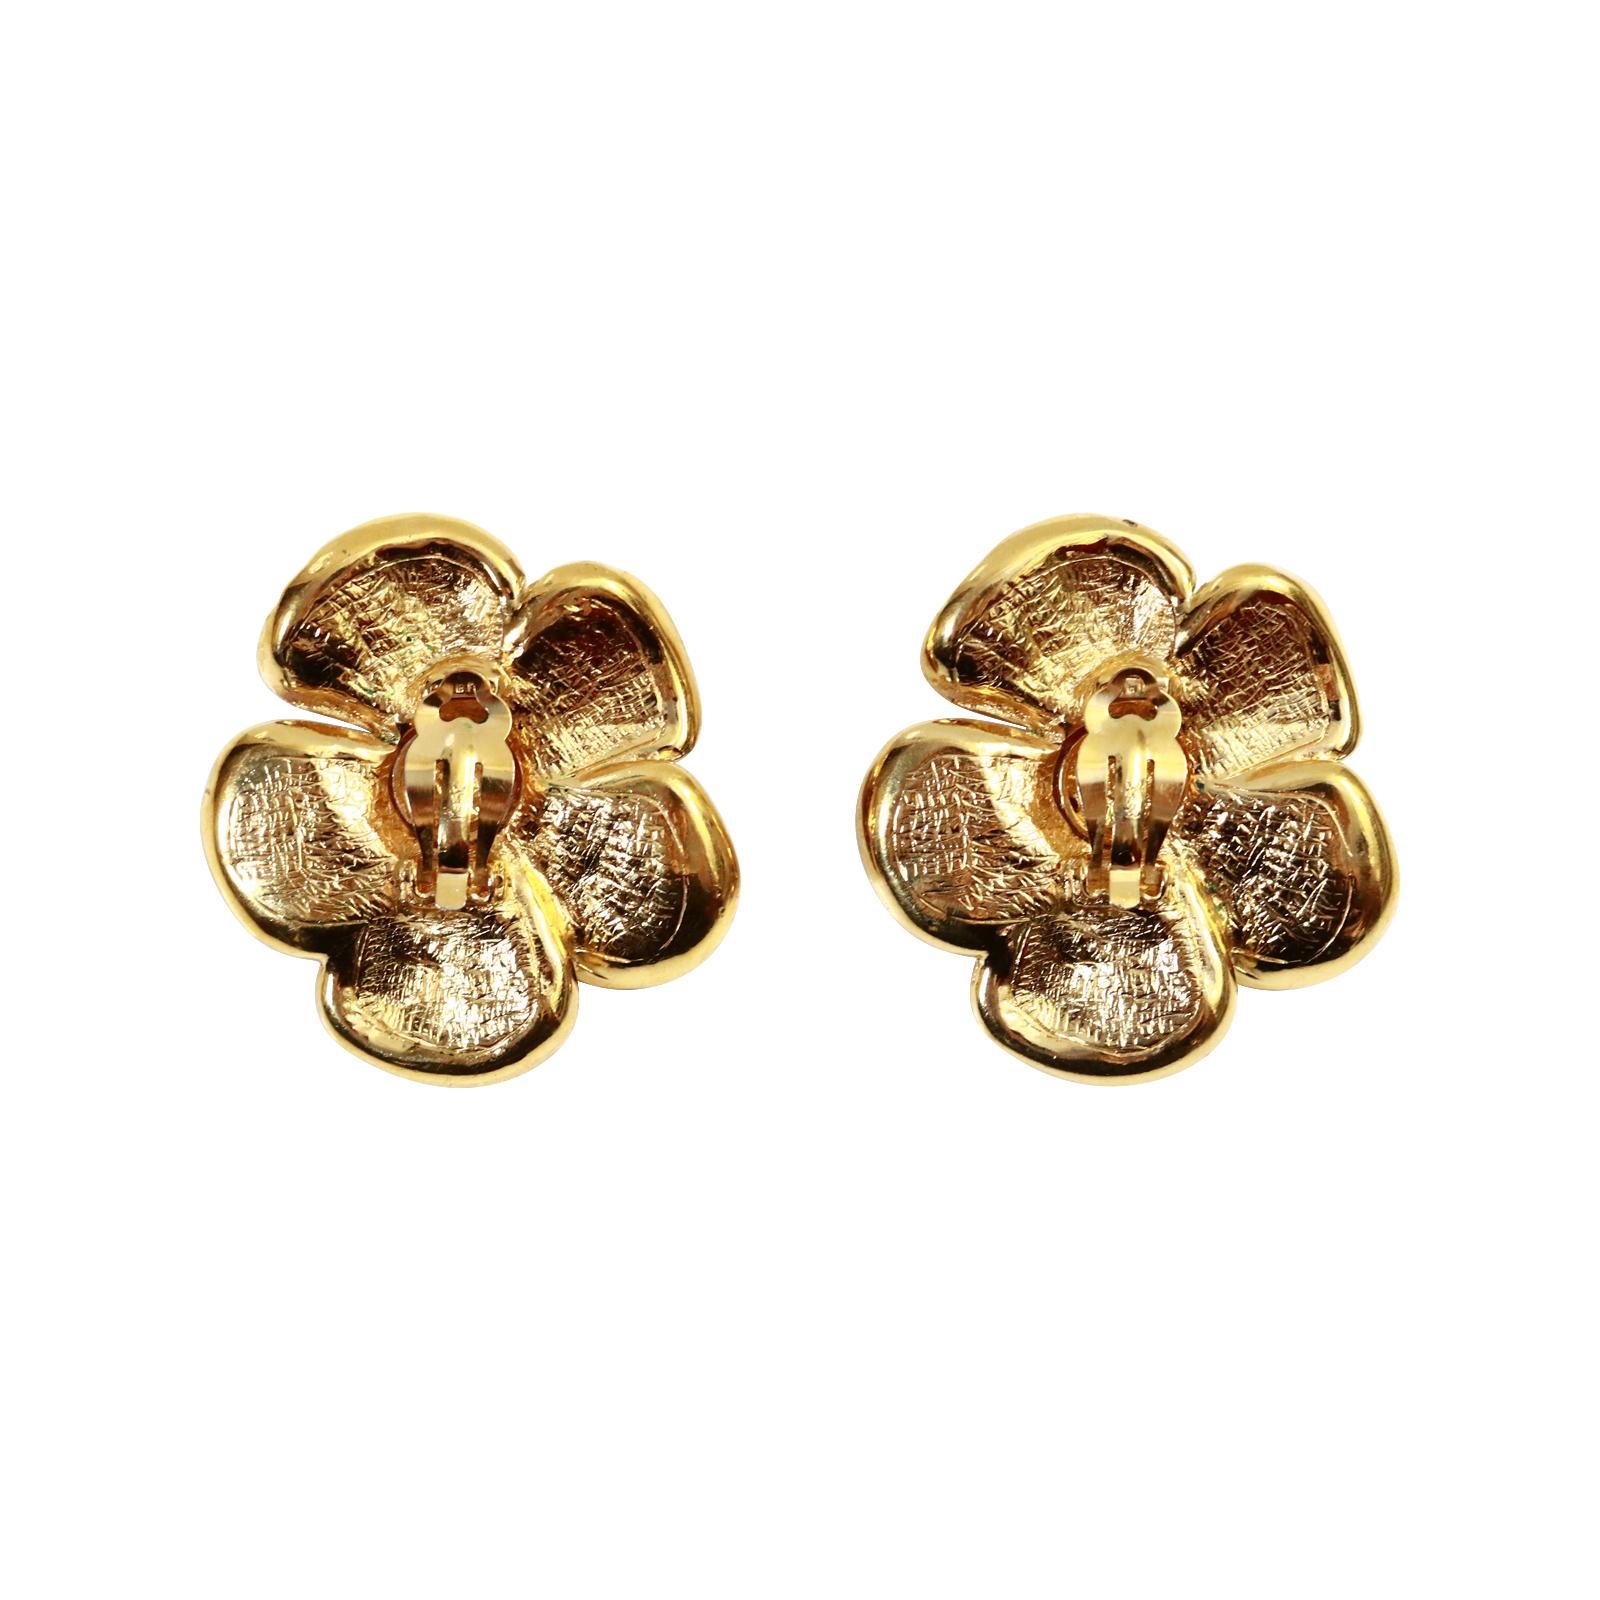 Vintage Yves Saint Laurent YSL Gold Pink and Red Flower Earrings Circa 1980's For Sale 1